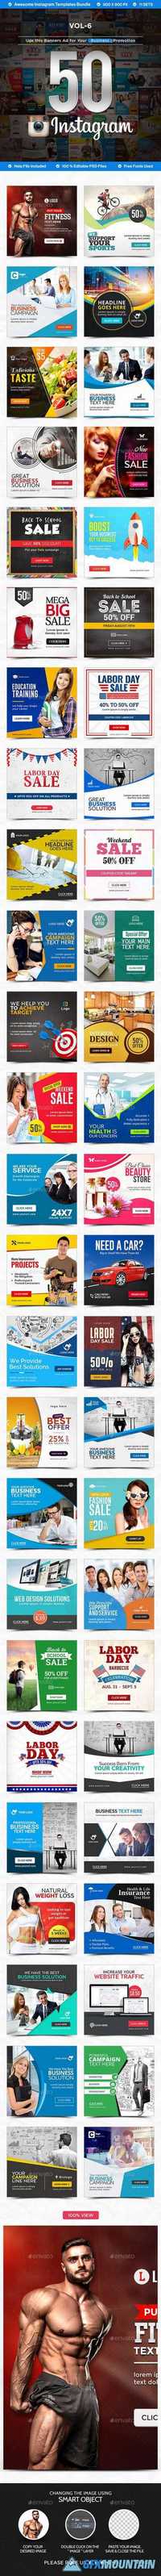 GraphicRiver - Instagram Template Banners - 50 Designs - 18176321